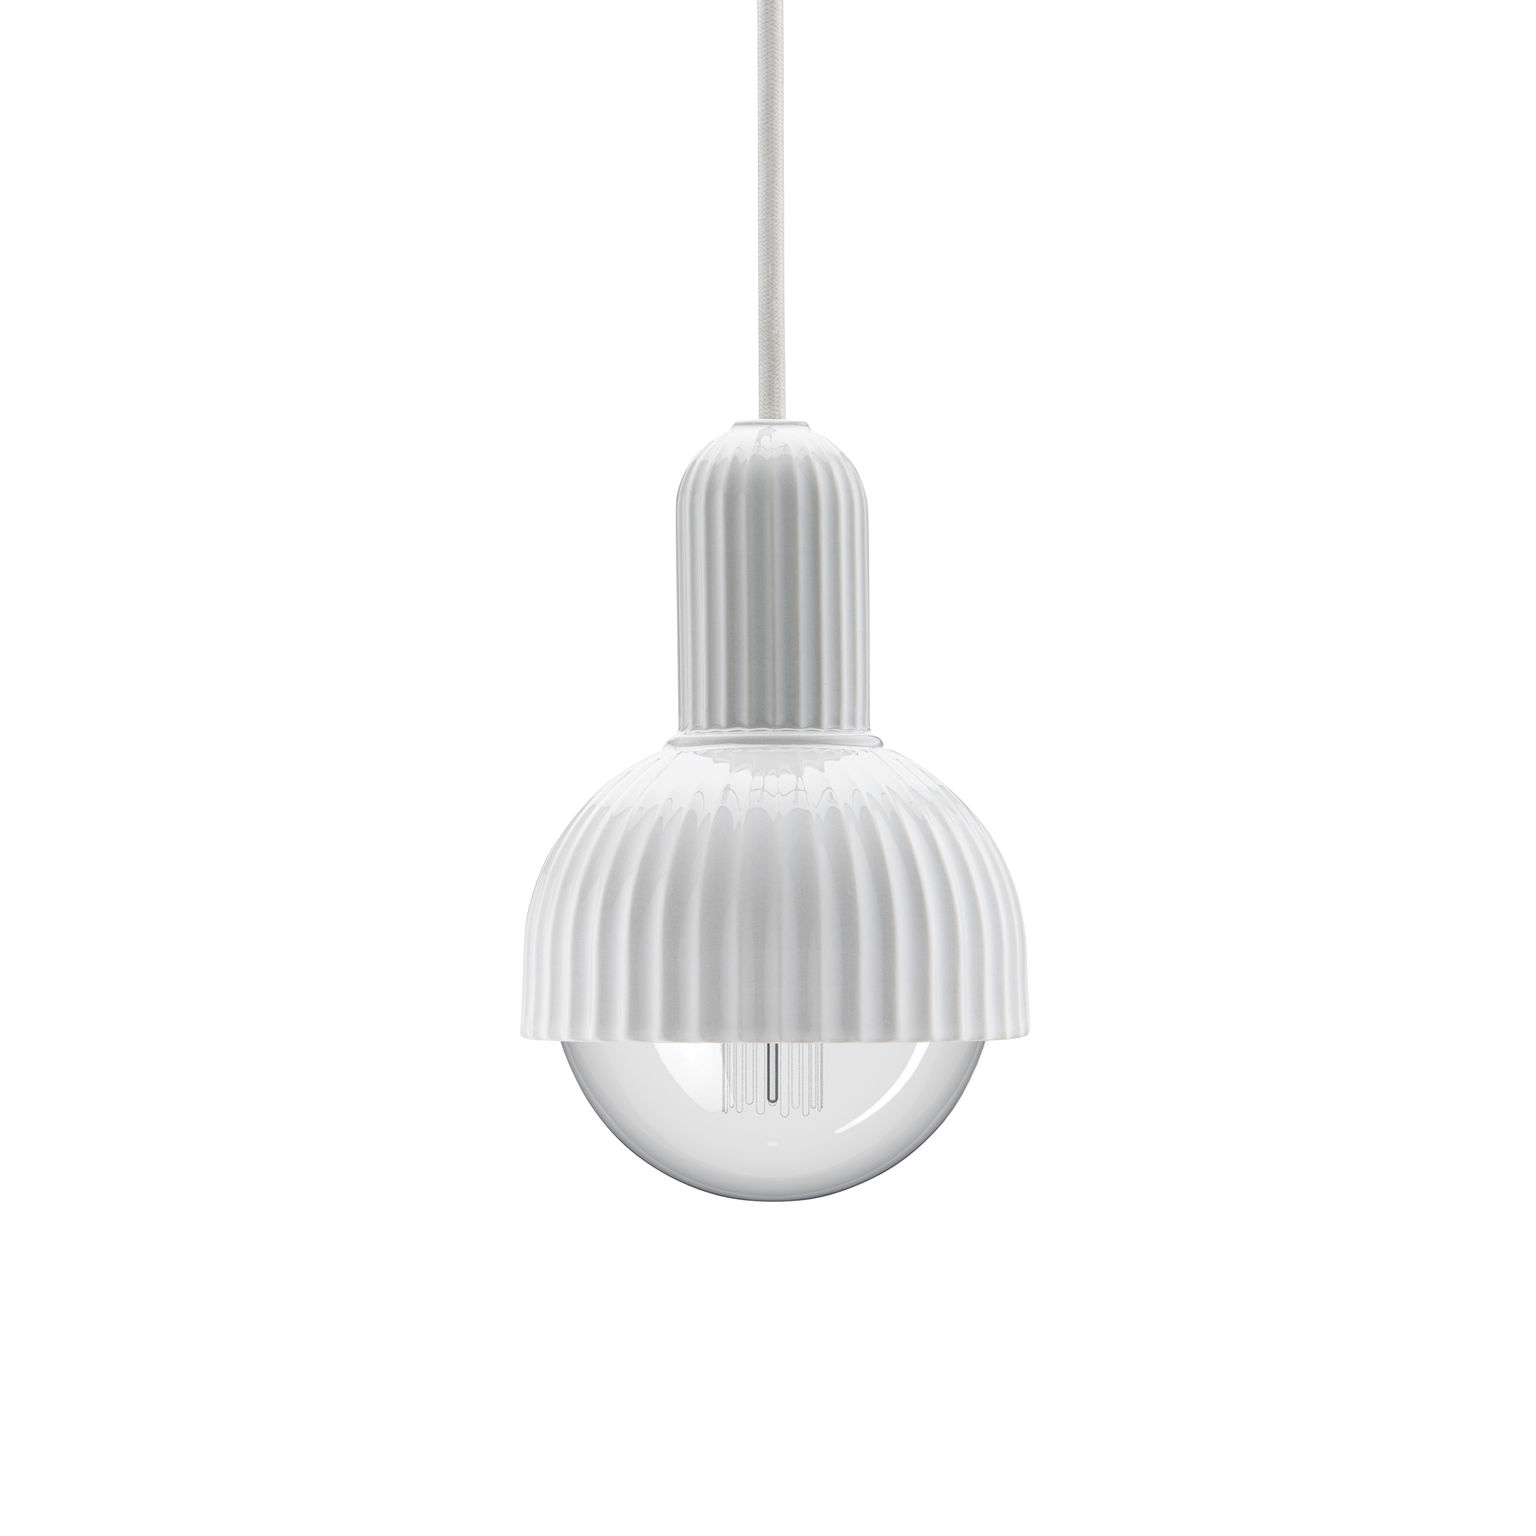 LP Fitting #02 pendant from Lyngby Porcelæn